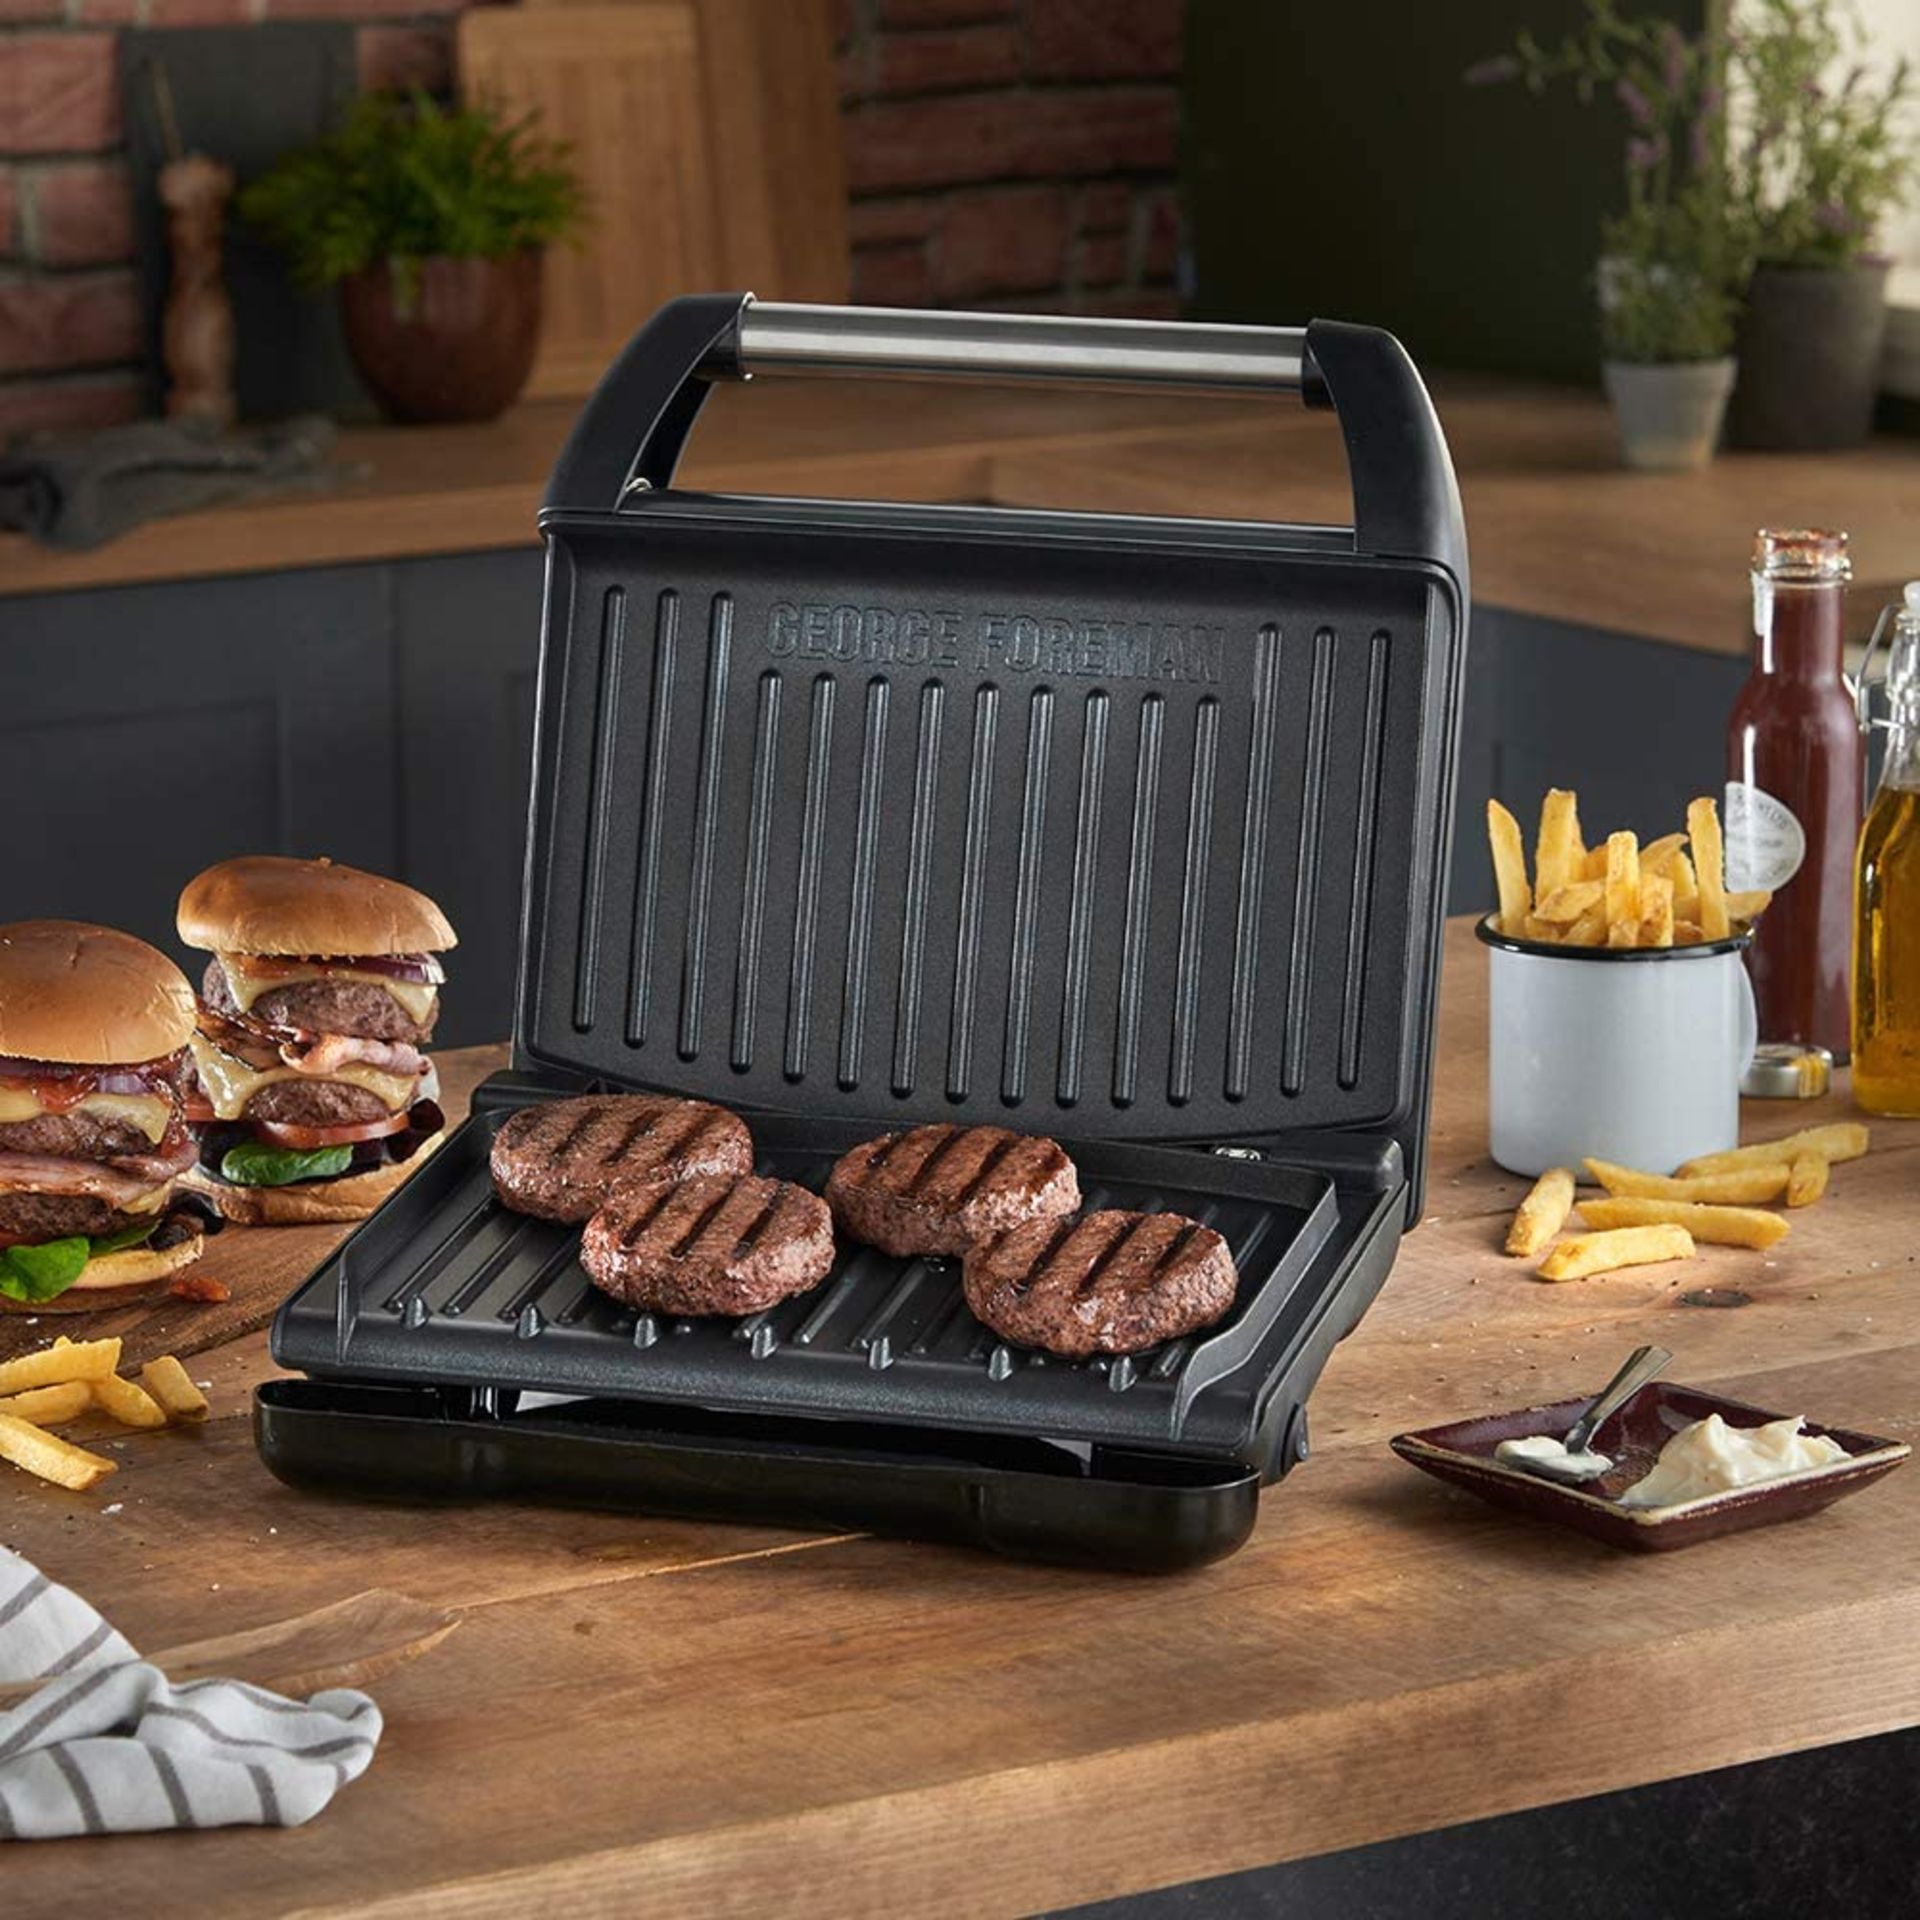 Grade A George Foreman Compact Steel Grill - RRP £32 - Image 2 of 3